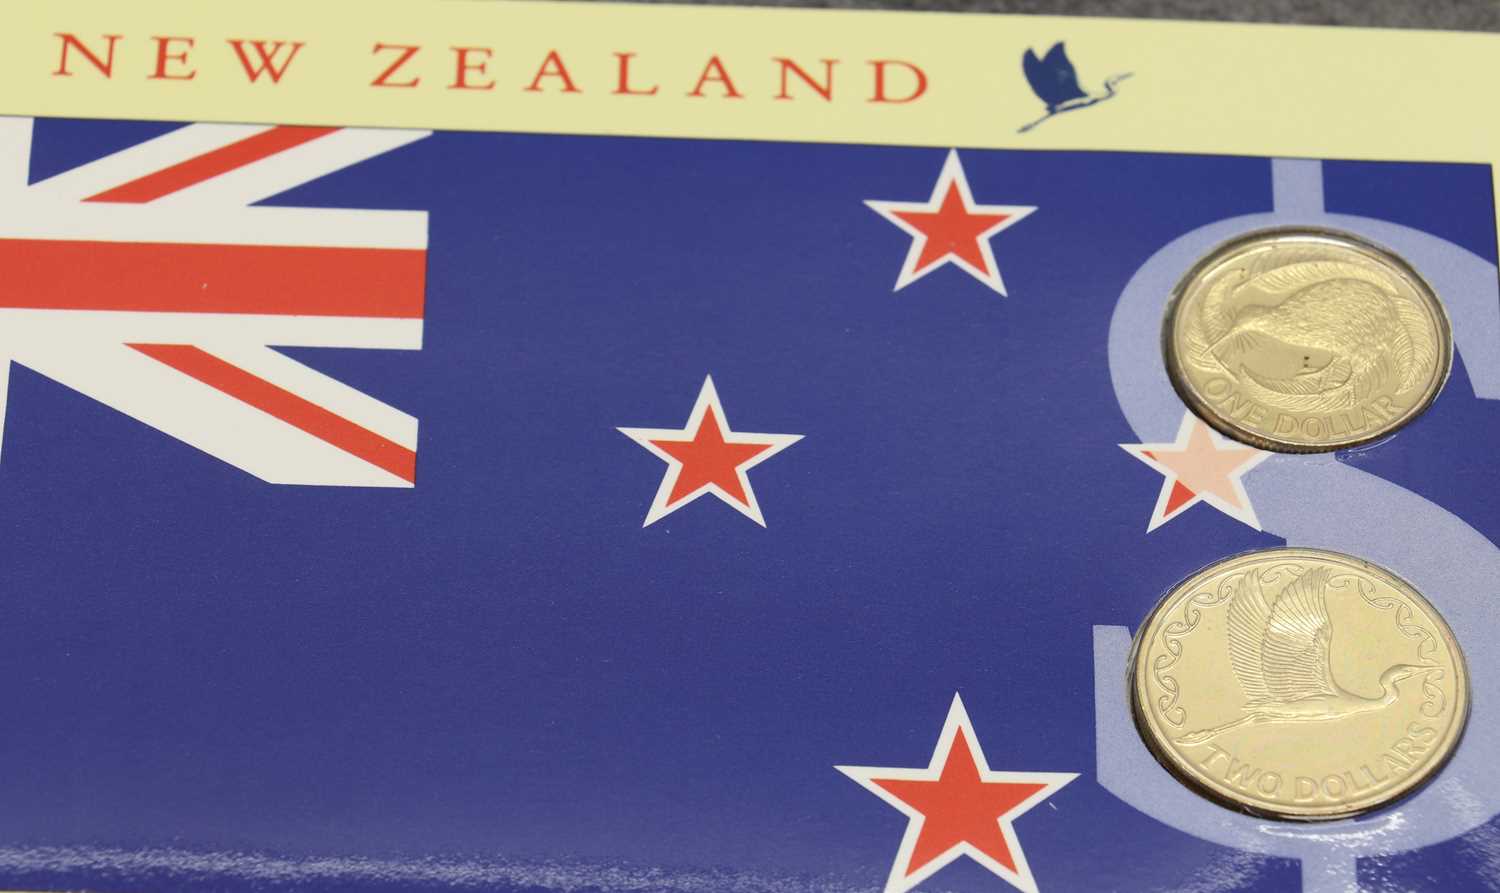 A collection of uncirculated Australian New Zealand mint coins, - Image 11 of 18